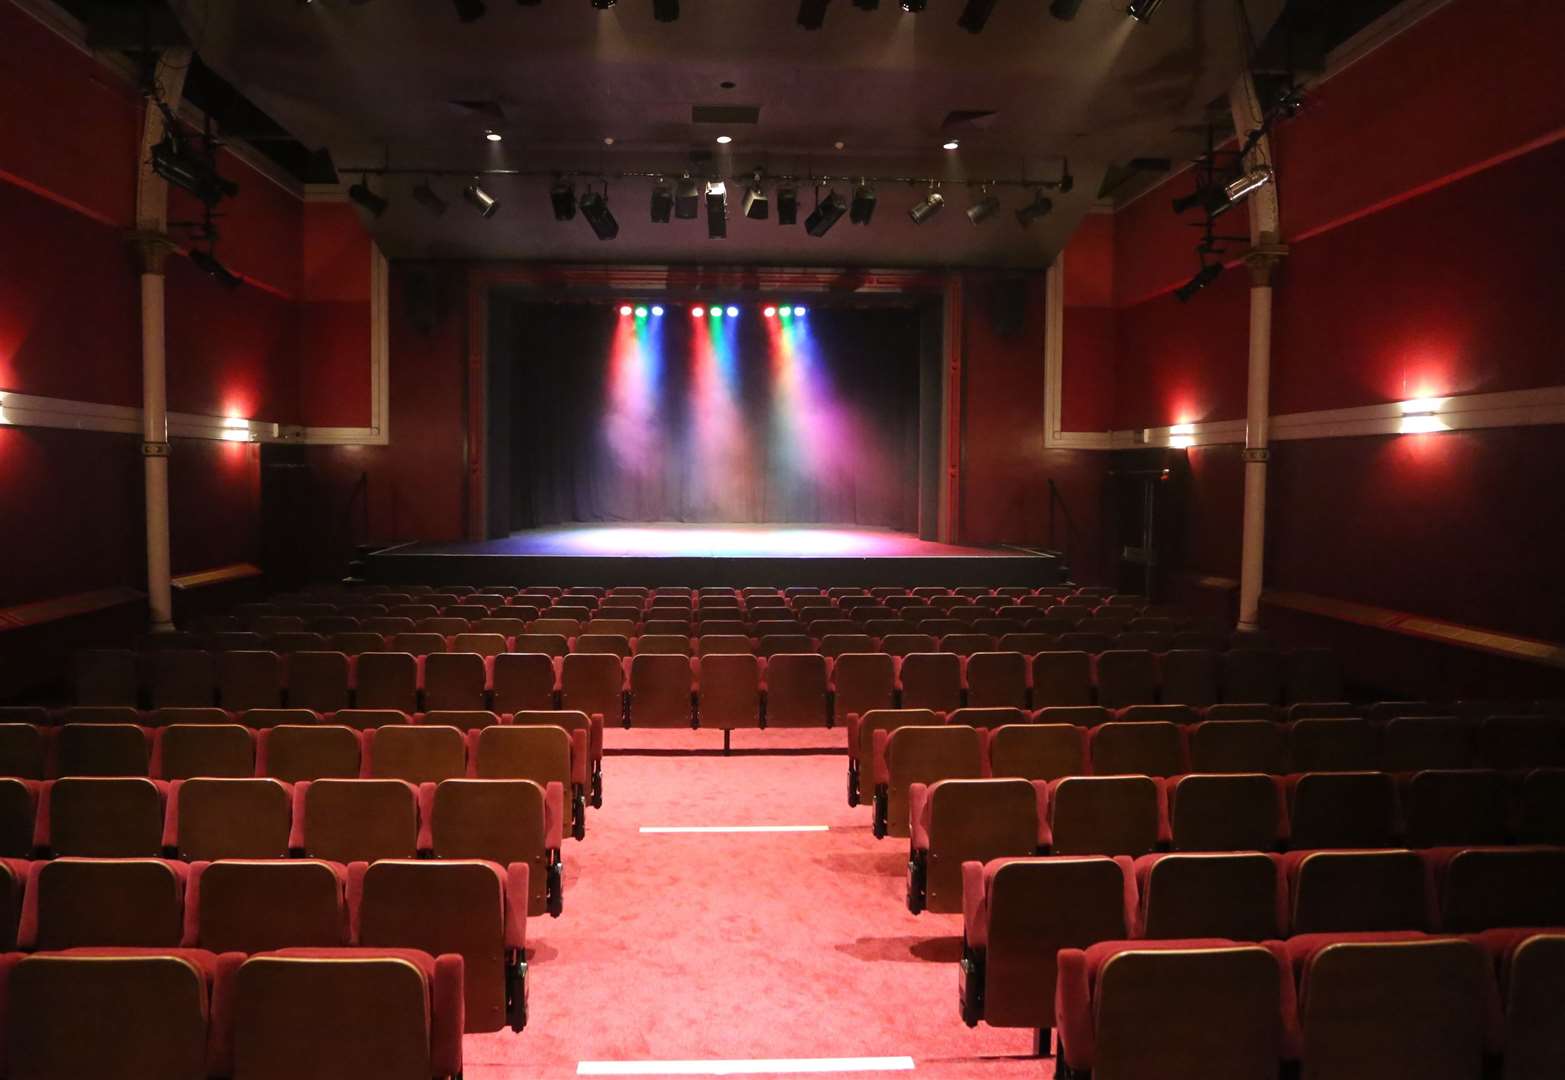 No shows have been performed at Hazlitt Theatre for many months now. Picture by: Martin Apps